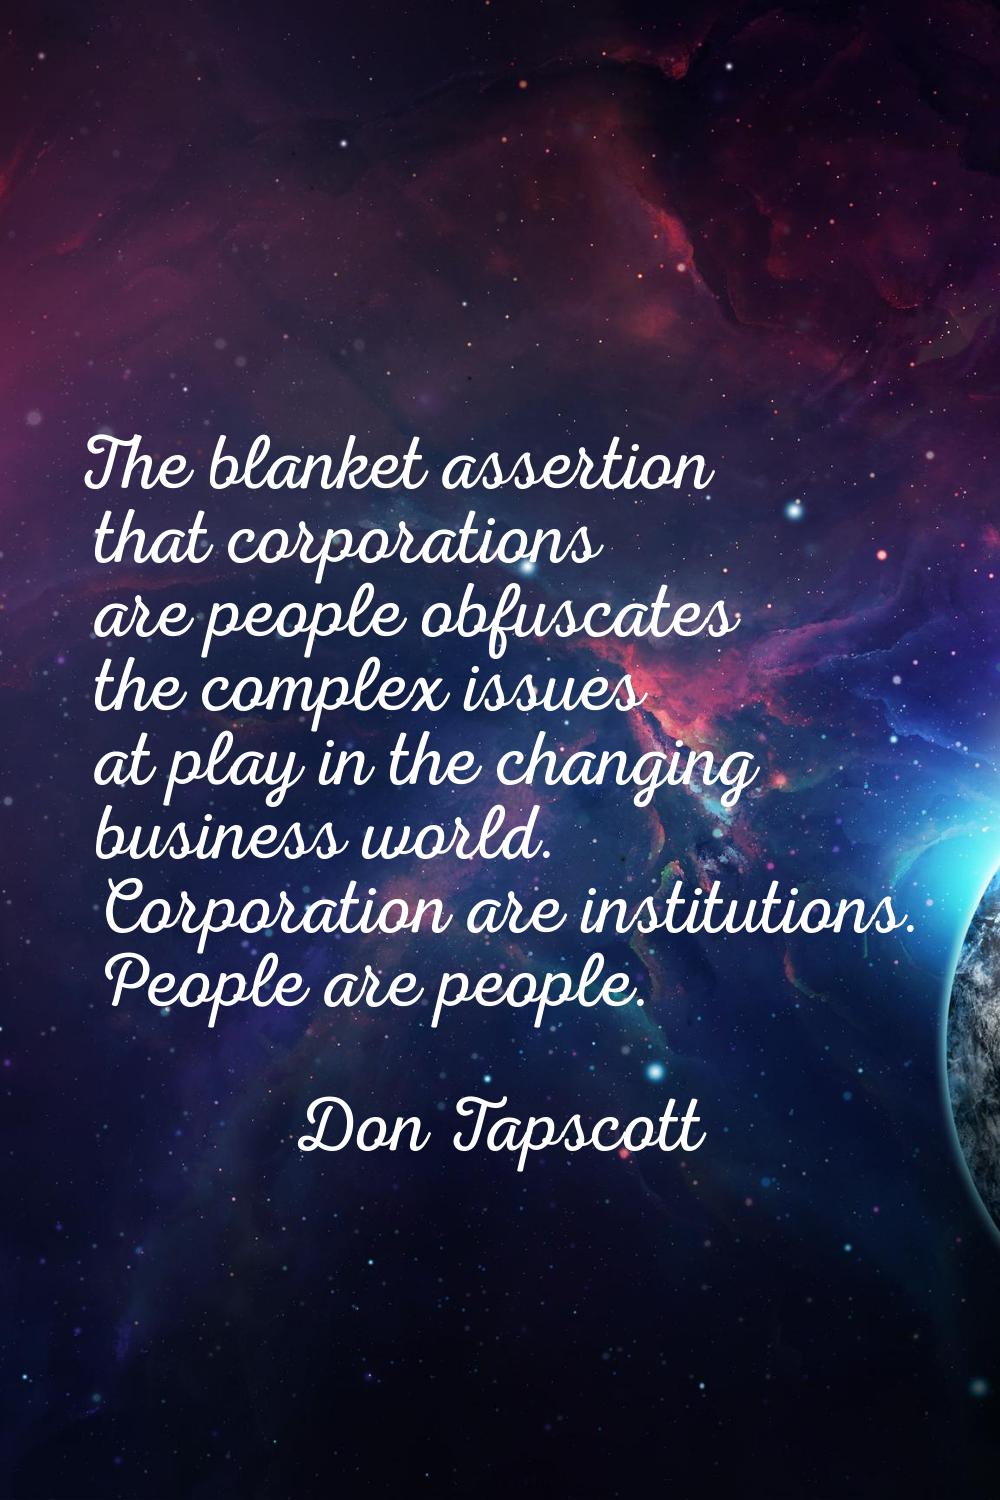 The blanket assertion that corporations are people obfuscates the complex issues at play in the cha